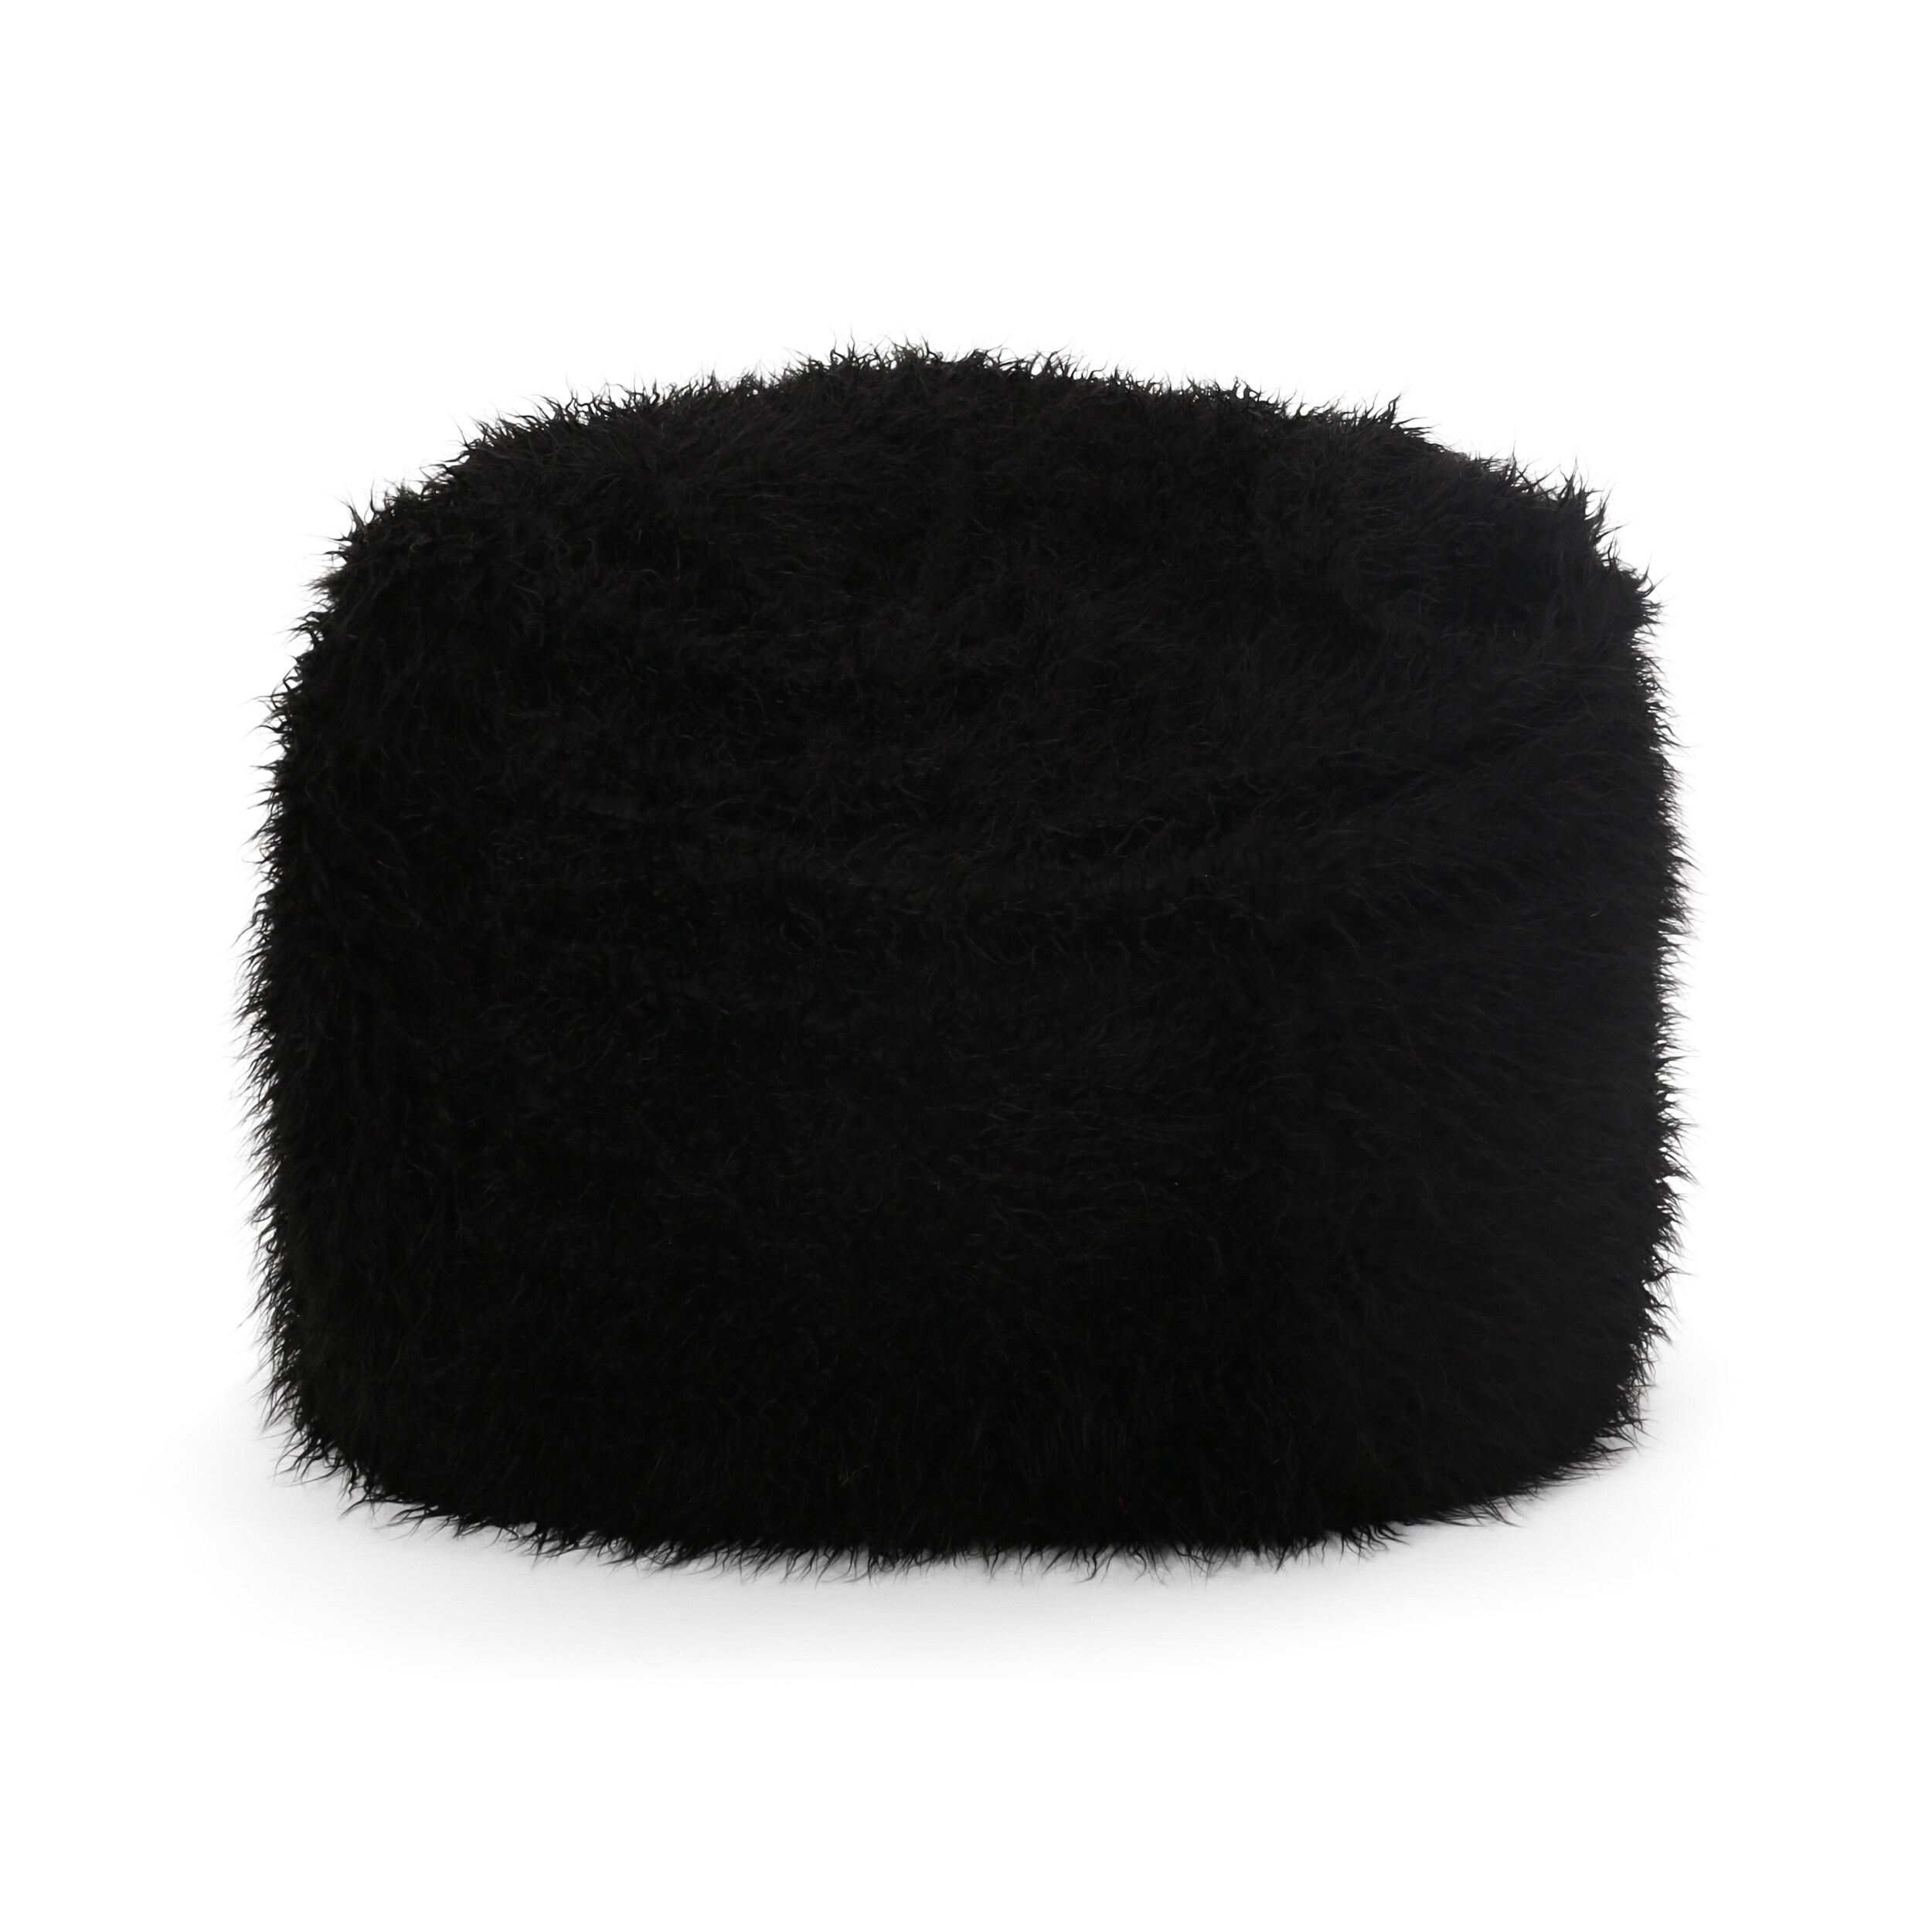 Lachlan Furry Bean Bag - Christopher Knight Home : Target